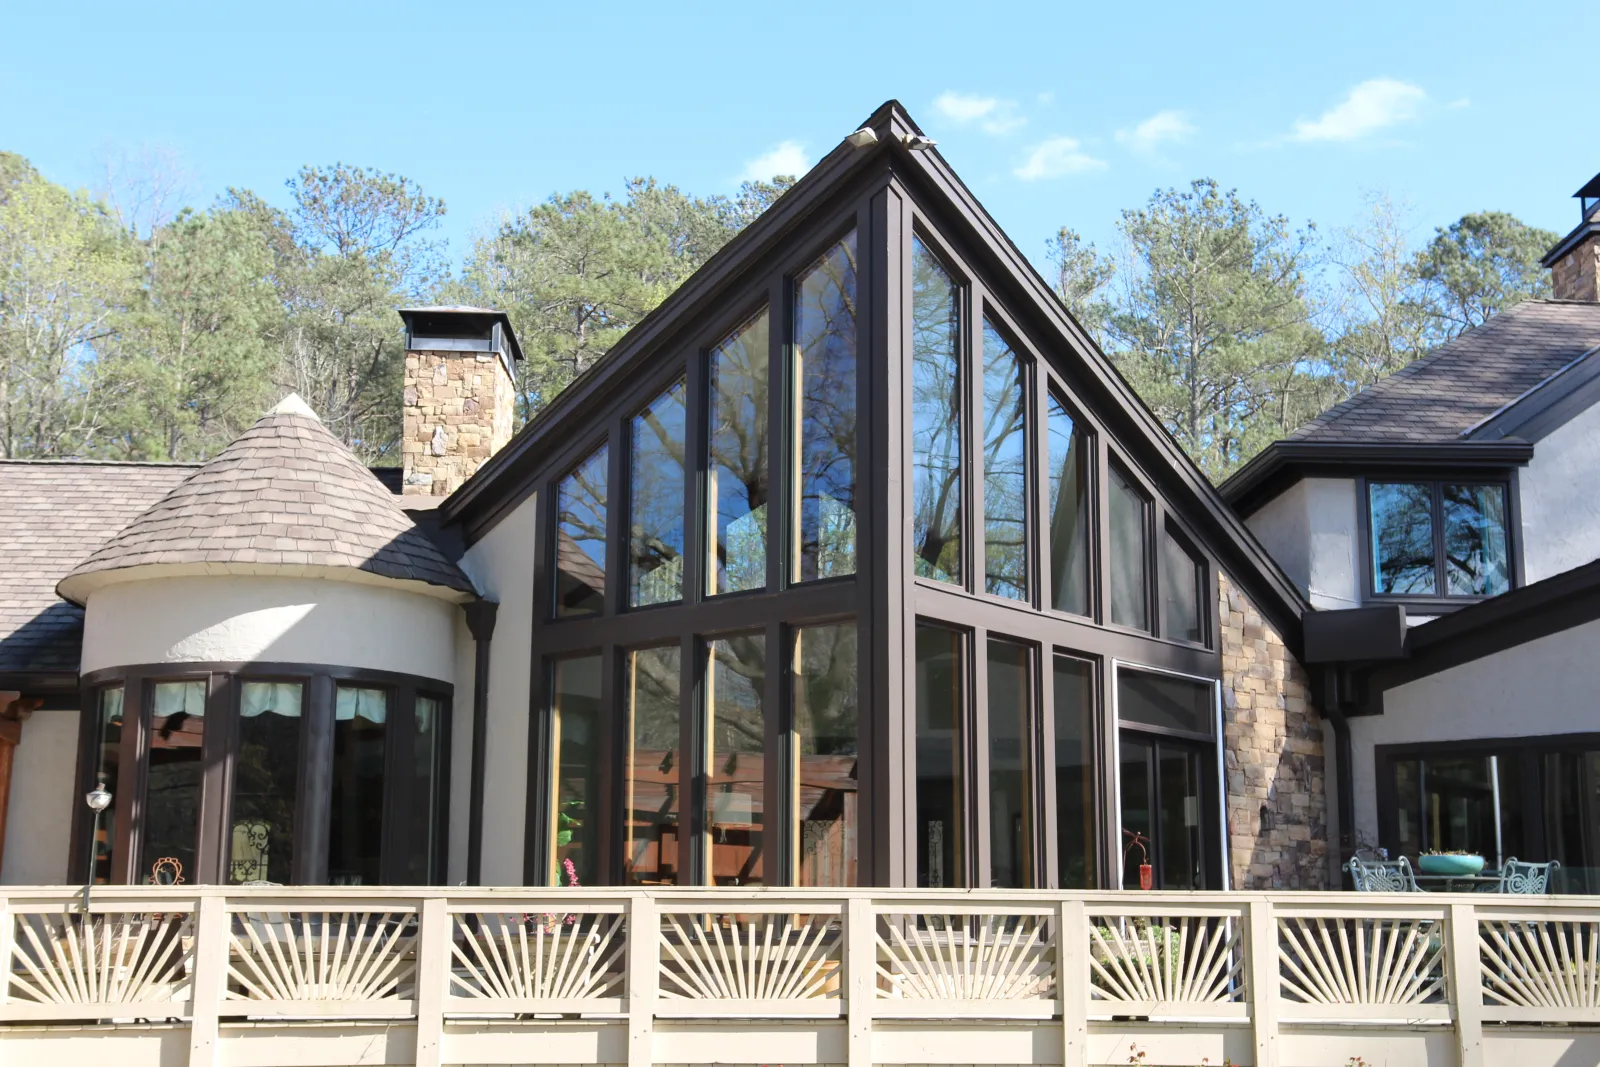 Floor-to-ceiling Infinity from Marvin windows open up view to Chatahoochee River 